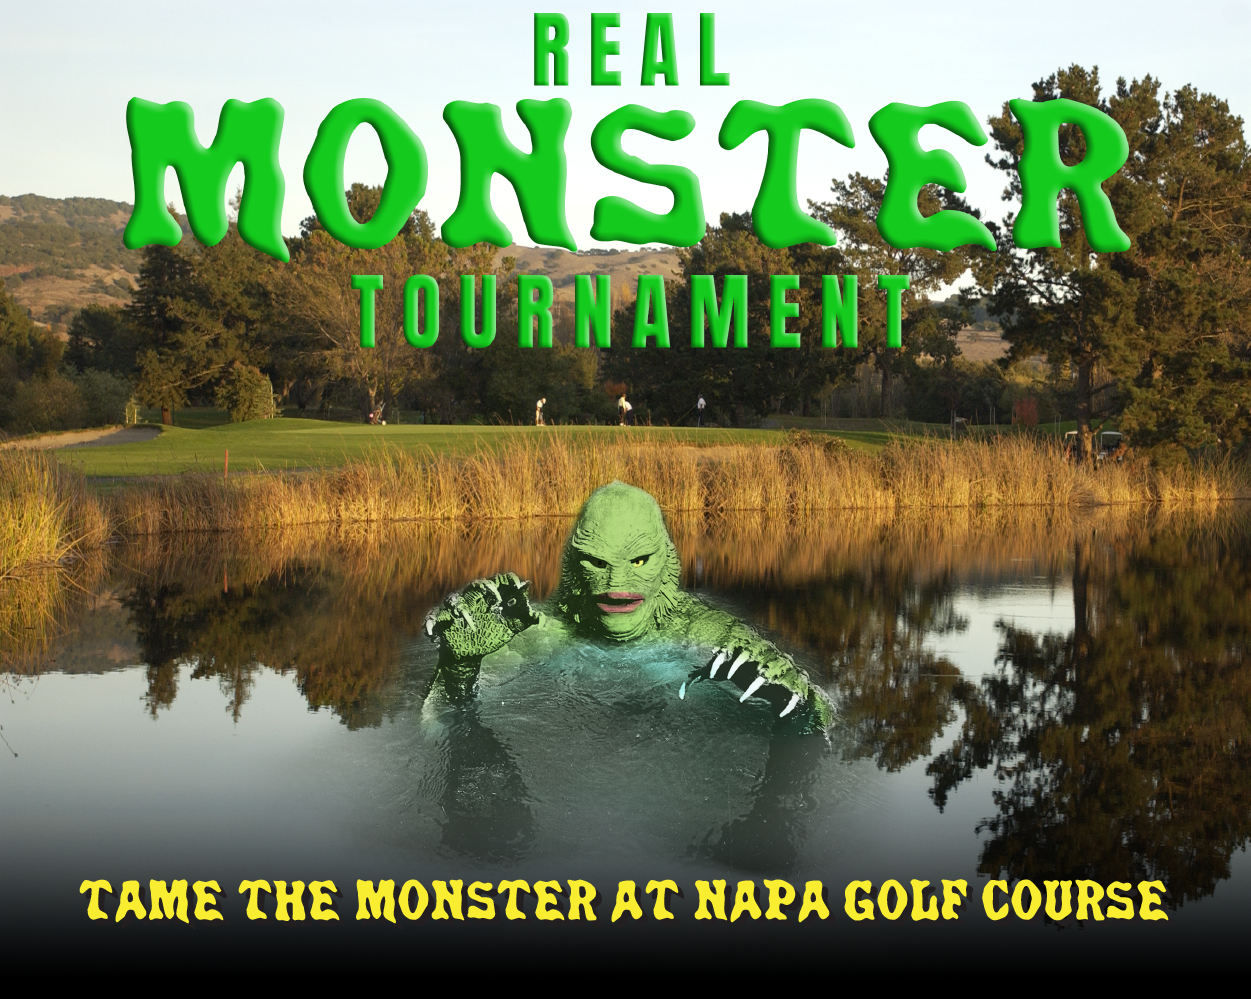 Real Monster Tournament Headline over image of a monster in the River